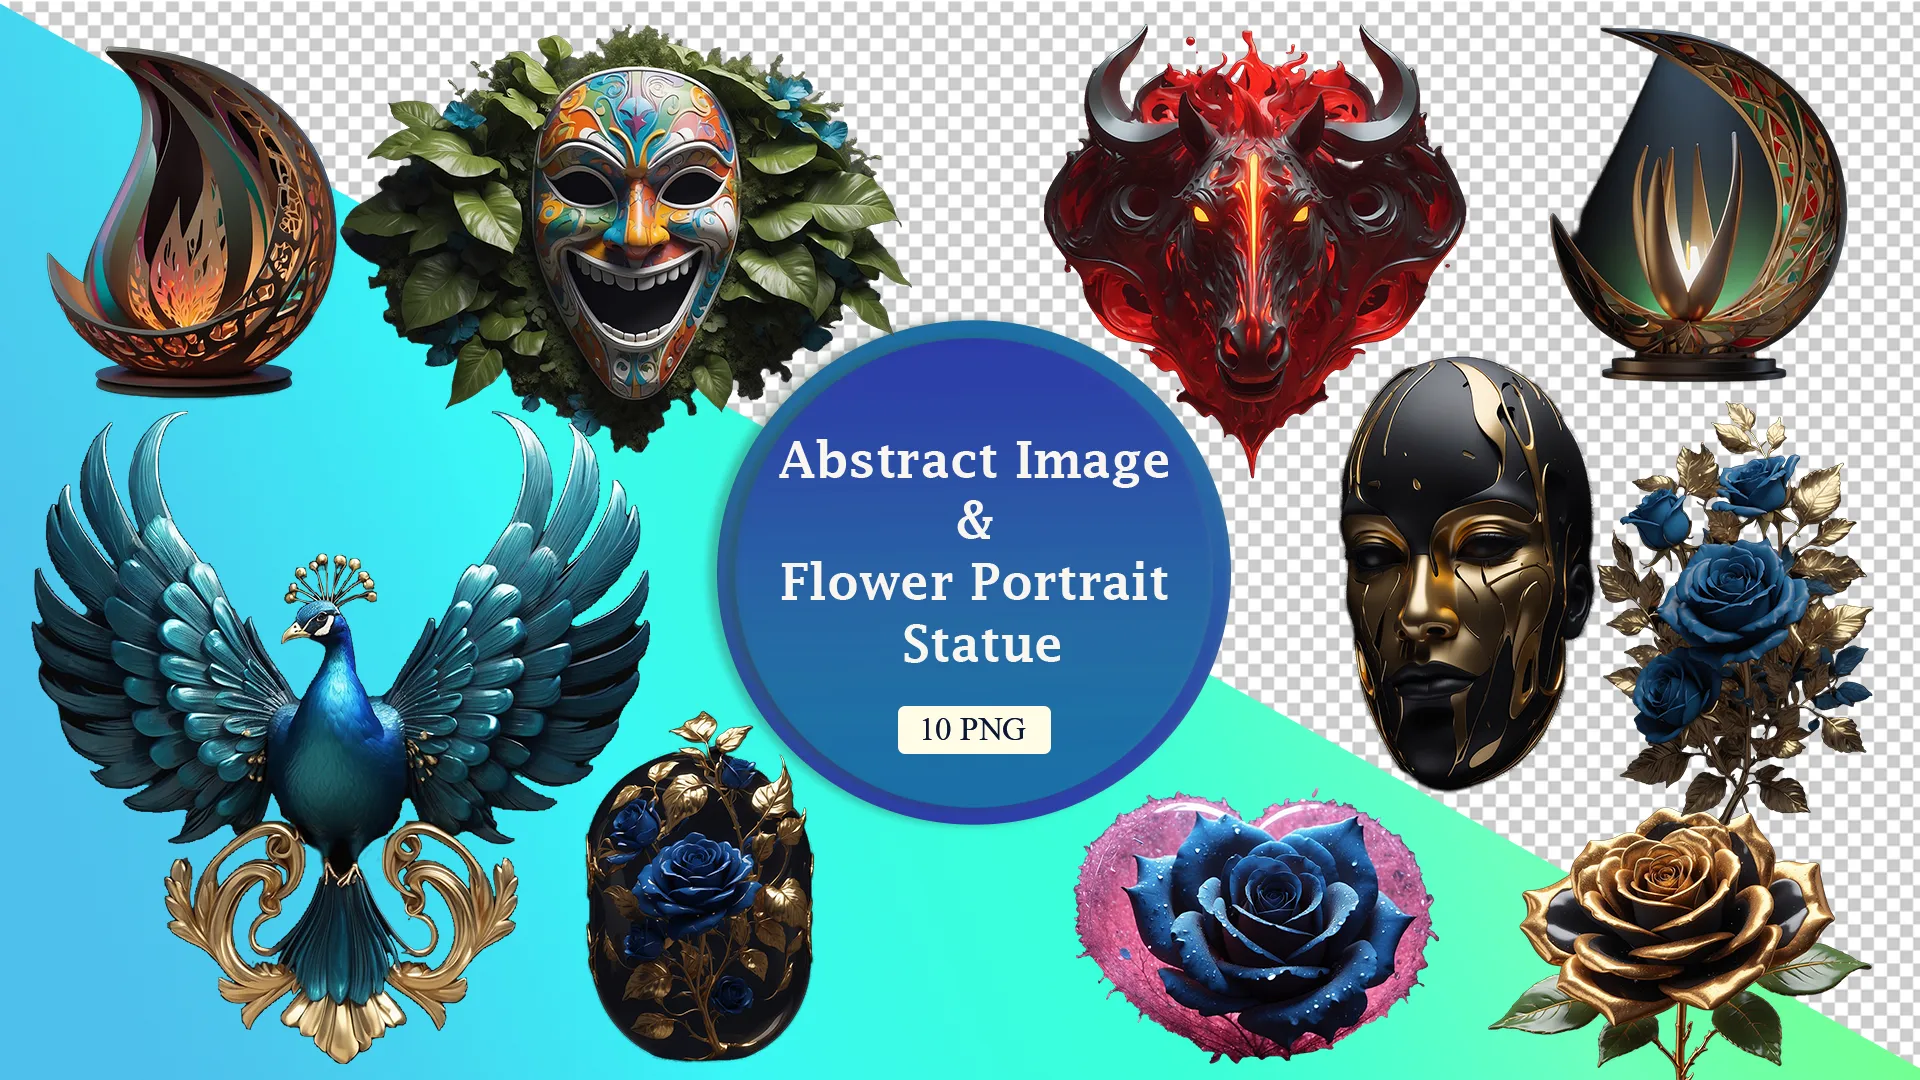 Majestic Peacock and Floral Portrait Statue 3D Pack image